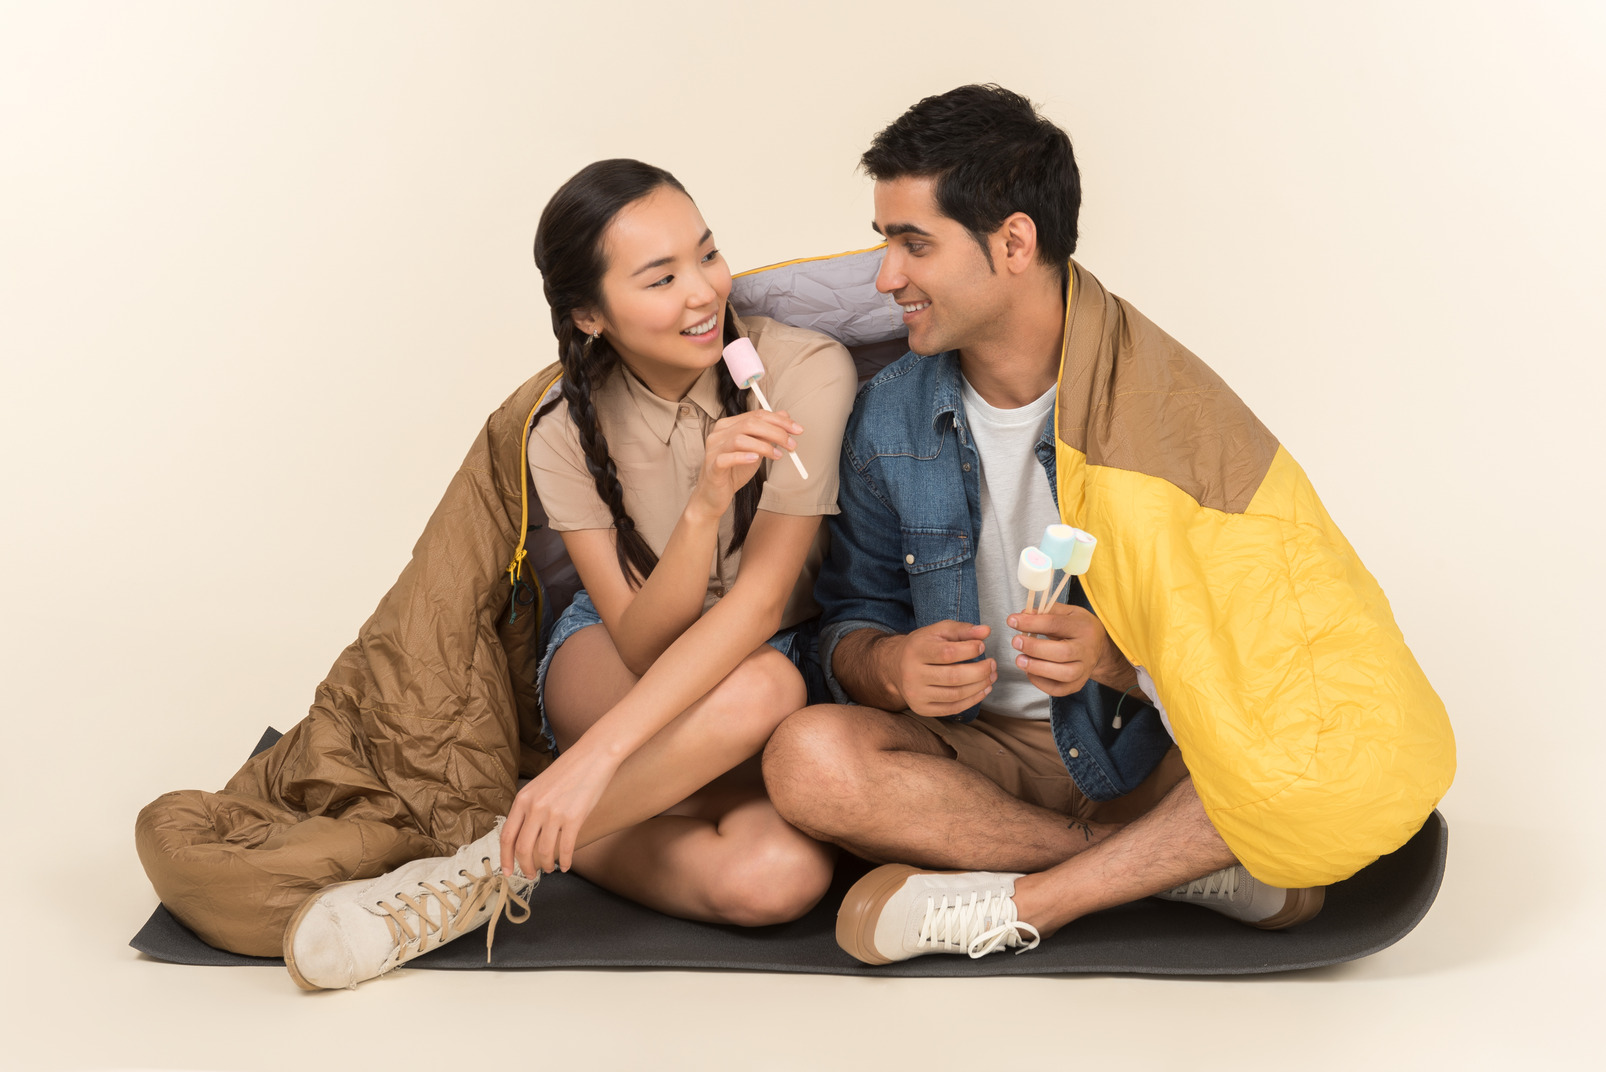 Young interracial couple sitting in sleeping bag and holding marshmallows